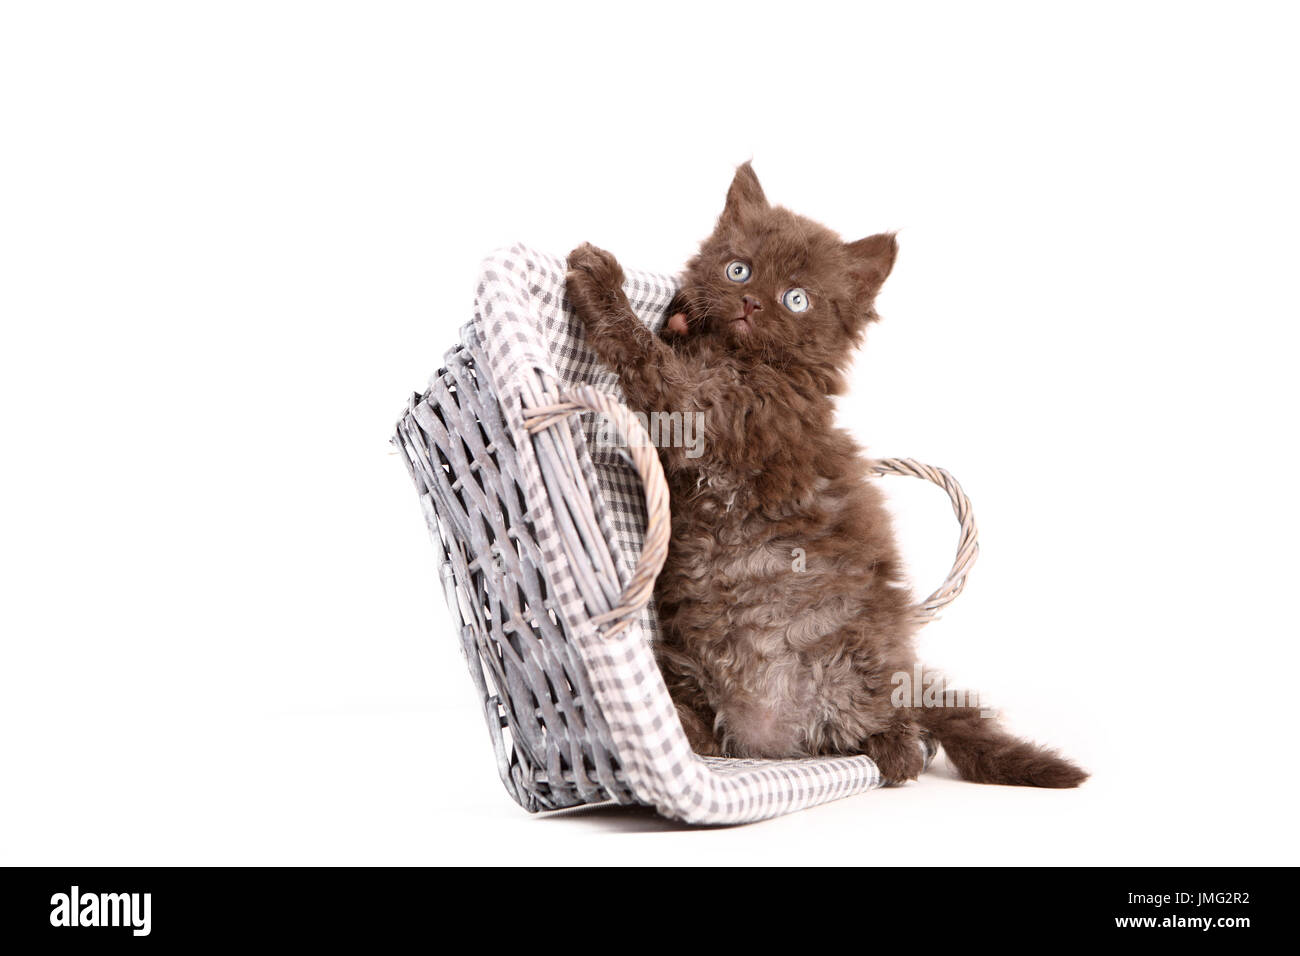 Selkirk Rex. Kitten (6 weeks old) sitting in a basket. Studio picture against a white background. Germany Stock Photo